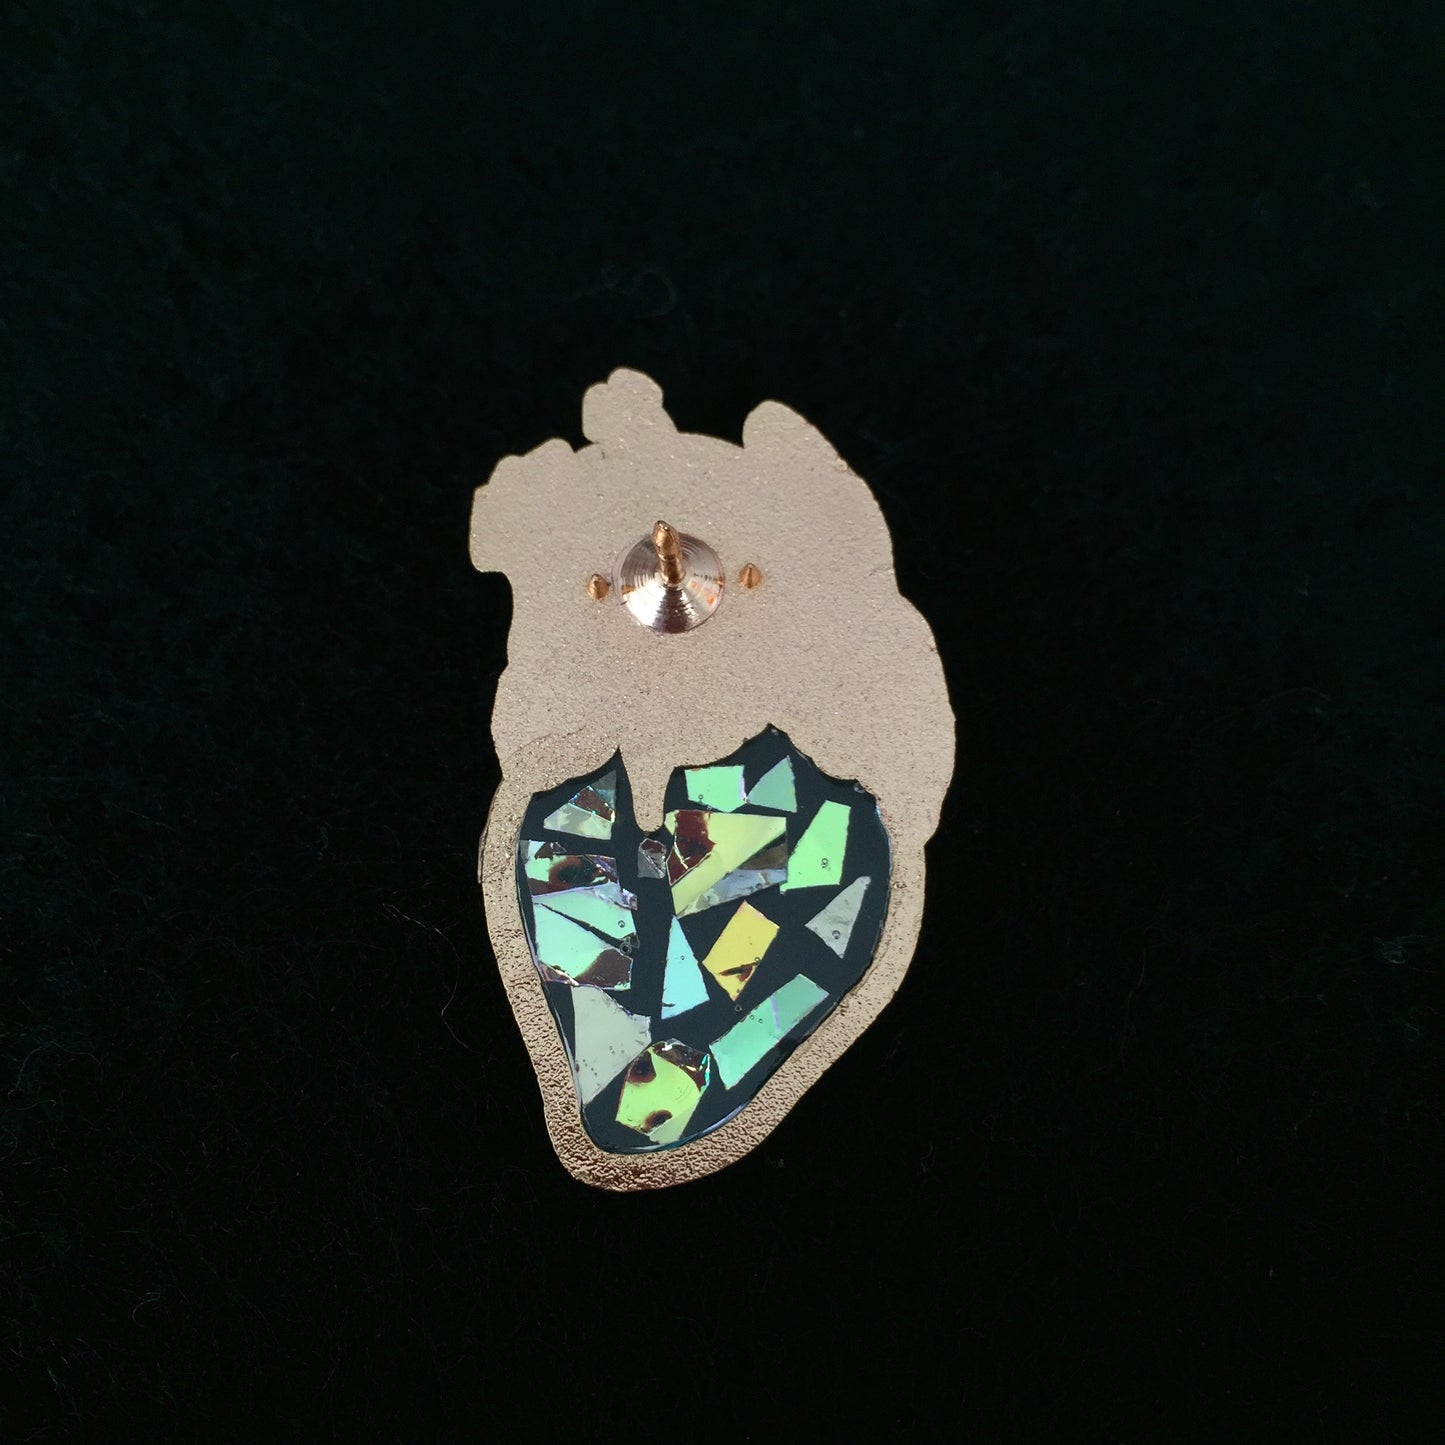 Transparent Heart Pin - Love Is A Mirror